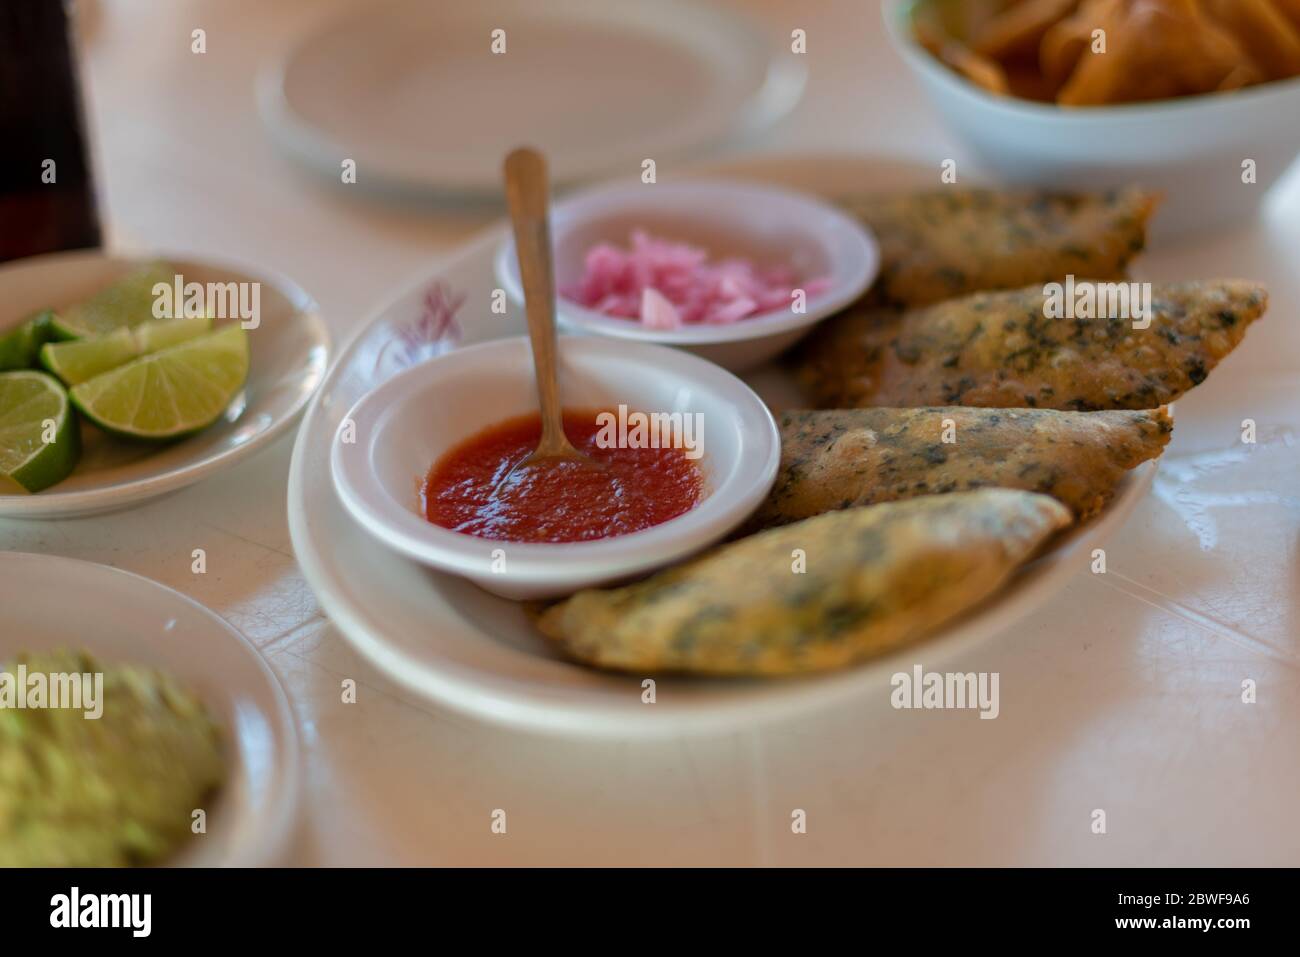 Empanadas - served with guacamole and lime - traditional Mexican/Argentinian food Stock Photo